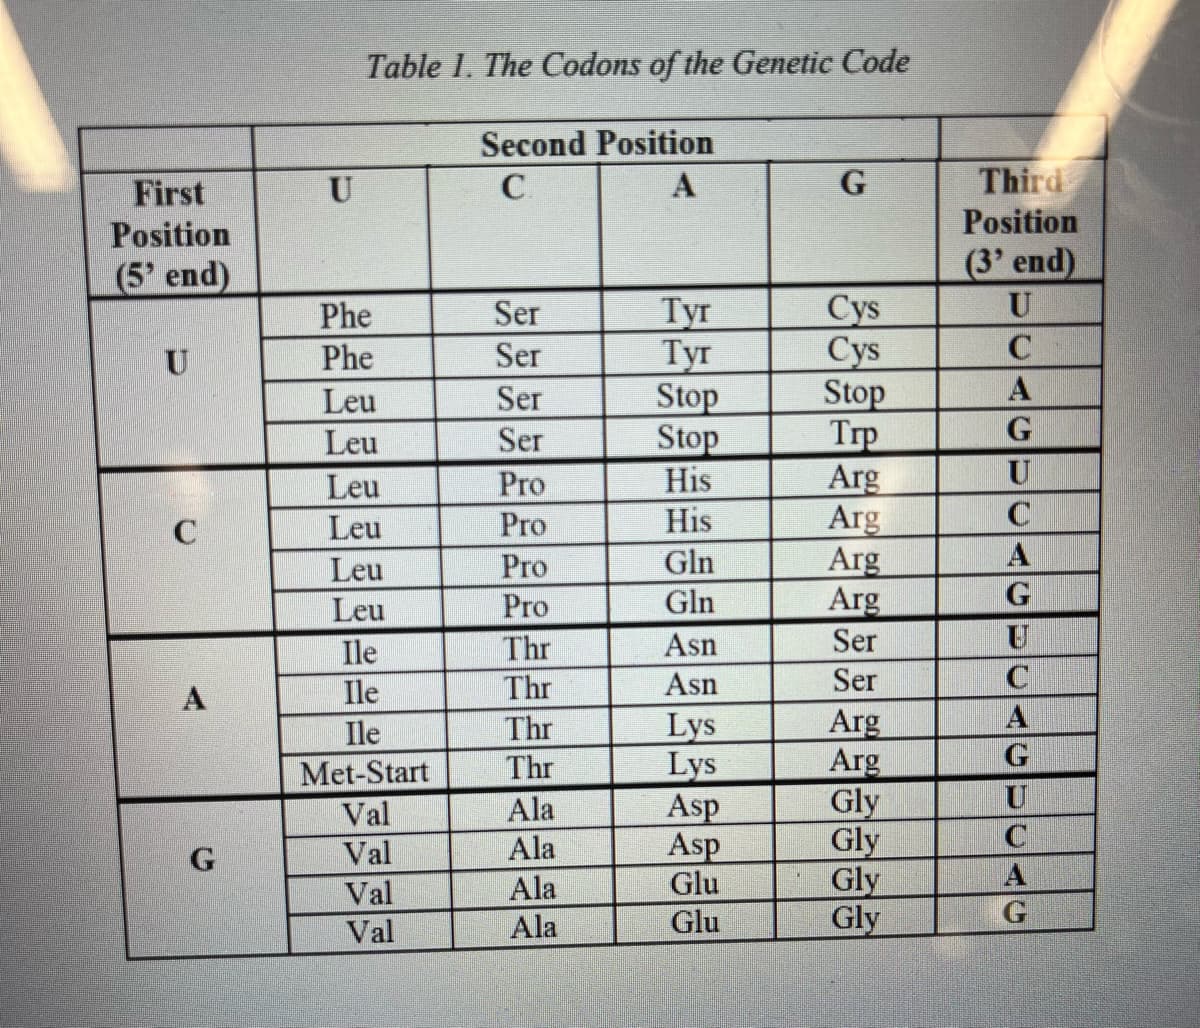 First
Position
(5' end)
U
C
A
G
U
Table 1. The Codons of the Genetic Code
Second Position
C
A
Phe
Phe
Leu
Leu
Leu
Leu
Leu
Leu
Ile
Ile
Ile
Met-Start
Val
Val
Val
Val
Ser
Ser
Ser
Ser
Pro
Pro
Pro
Pro
Thr
Thr
Thr
Thr
Ala
Ala
Ala
Ala
Tyr
Tyr
Stop
Stop
His
His
Gln
Gln
Asn
Asn
Lys
Lys
Asp
Asp
Glu
Glu
G
Cys
Cys
Stop
Trp
Arg
Arg
Arg
Arg
Ser
Ser
Arg
Arg
Gly
Gly
Gly
Gly
Third
Position
(3' end)
U
C
A
G
U
C
A
G
U
C
A
G
U
C
A
G